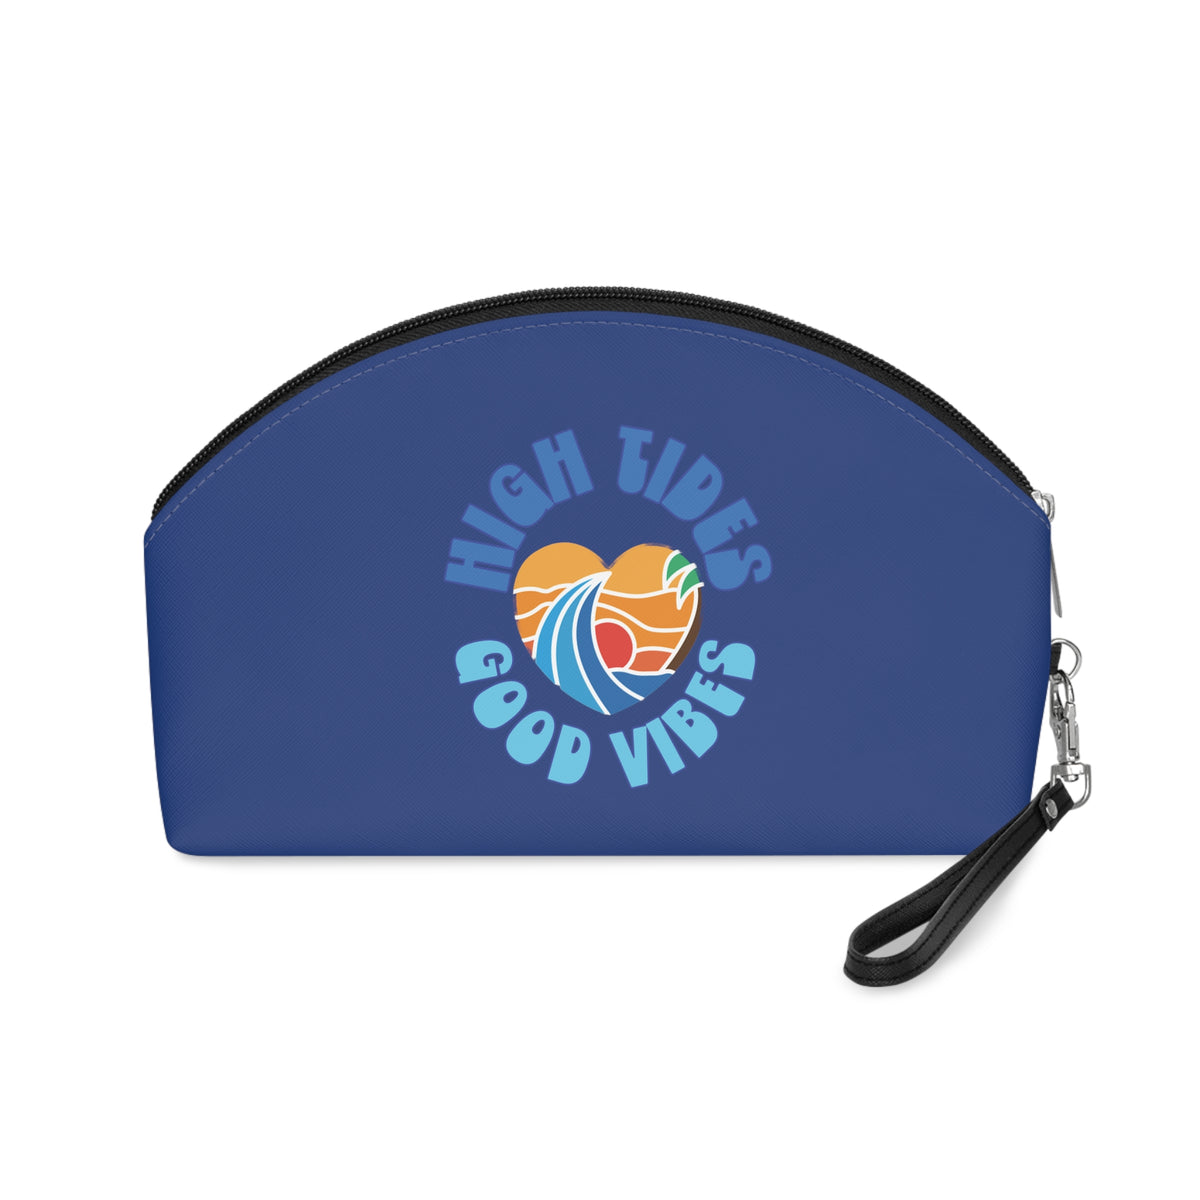 High Tides Good Vibes Vegan Leather Pouch